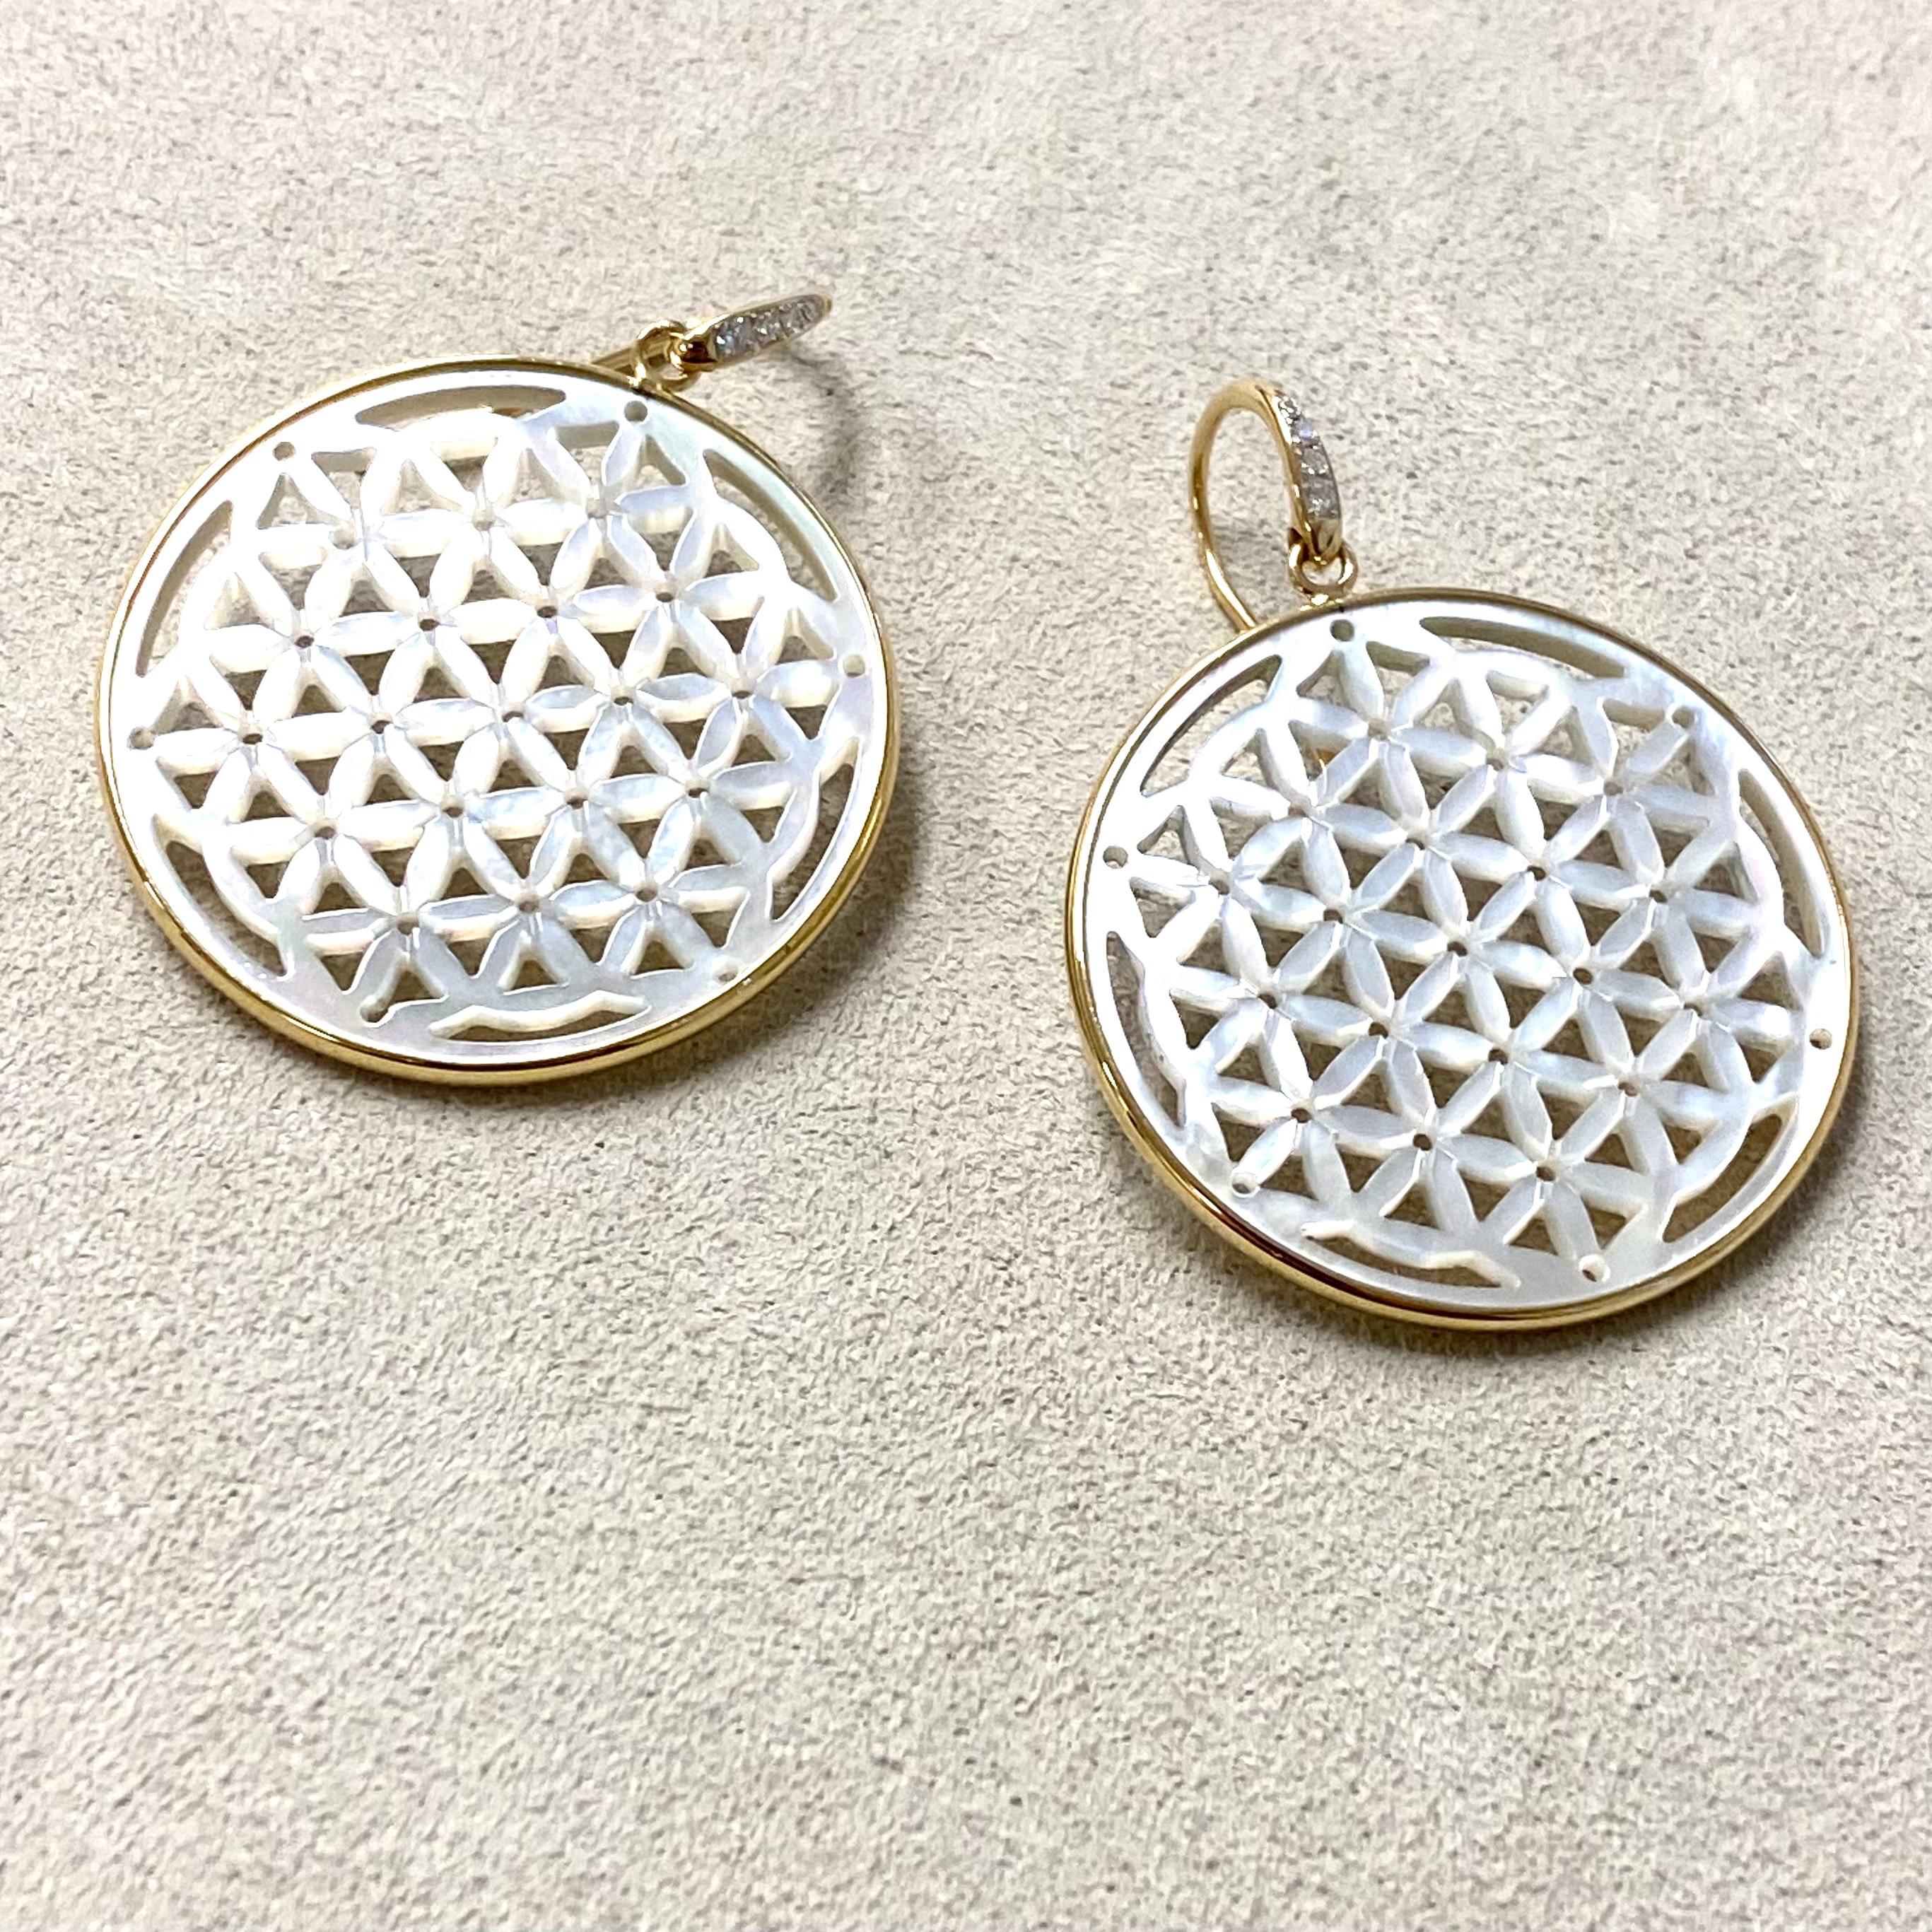 Created in 18 karat yellow gold
Flower of life motif
Diamonds 0.05 carat approx.
Limited edition

Gorgeous and one of a kind, these limited edition 18 karat yellow gold earrings boast a sophisticated Candy Blue Topaz and shimmering Moon Quartz set